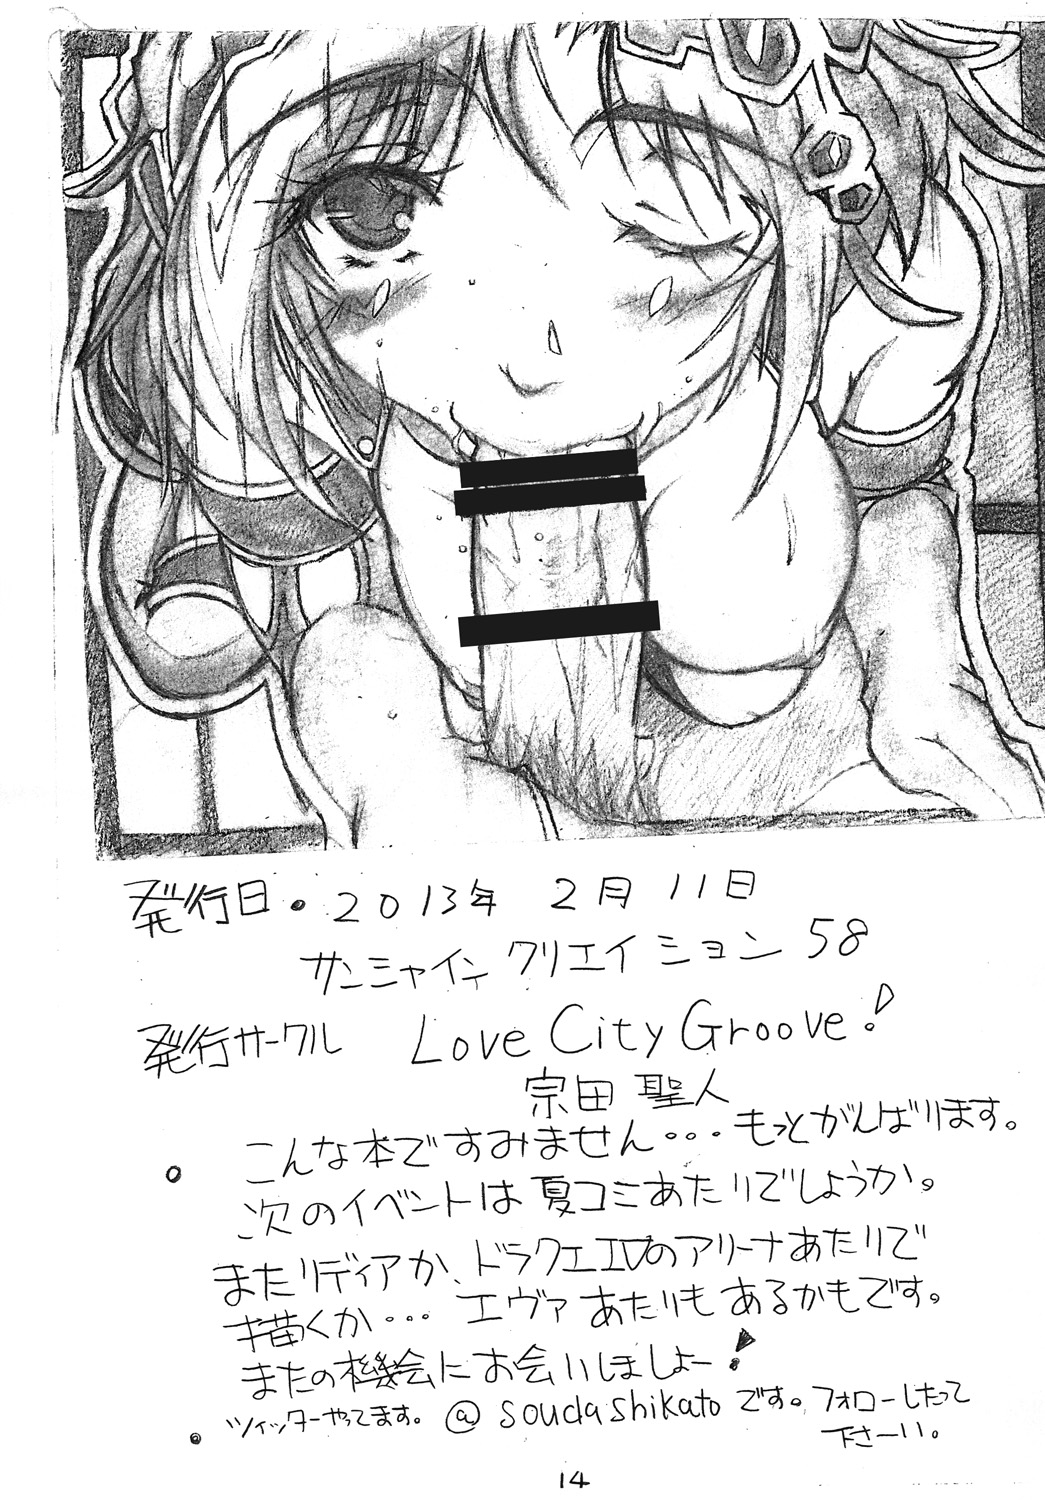 (SC58) [Love City Groove (Souda Shikato)] Rydia-san no After Service Ver1.5 (Final Fantasy Ⅳ) (サンクリ58) [Love City Groove (宗田聖人)] リディアさんのアフターサーヴィス Ver1.5 (ファイナルファンタジーⅣ)